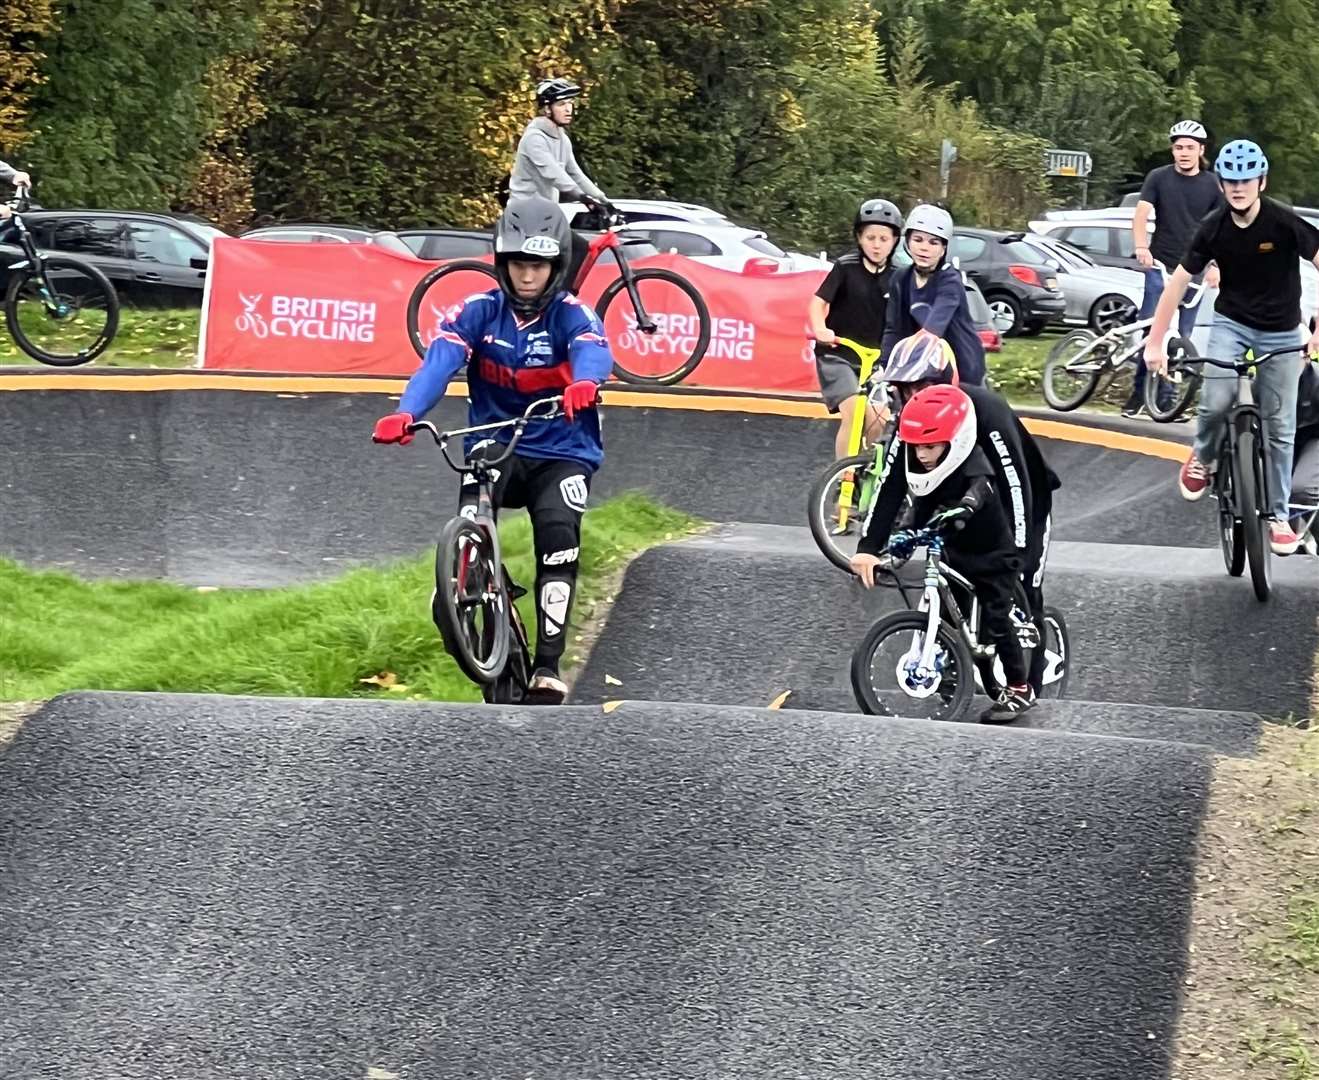 The new BMX Pump Track has opened to the public in Snodland